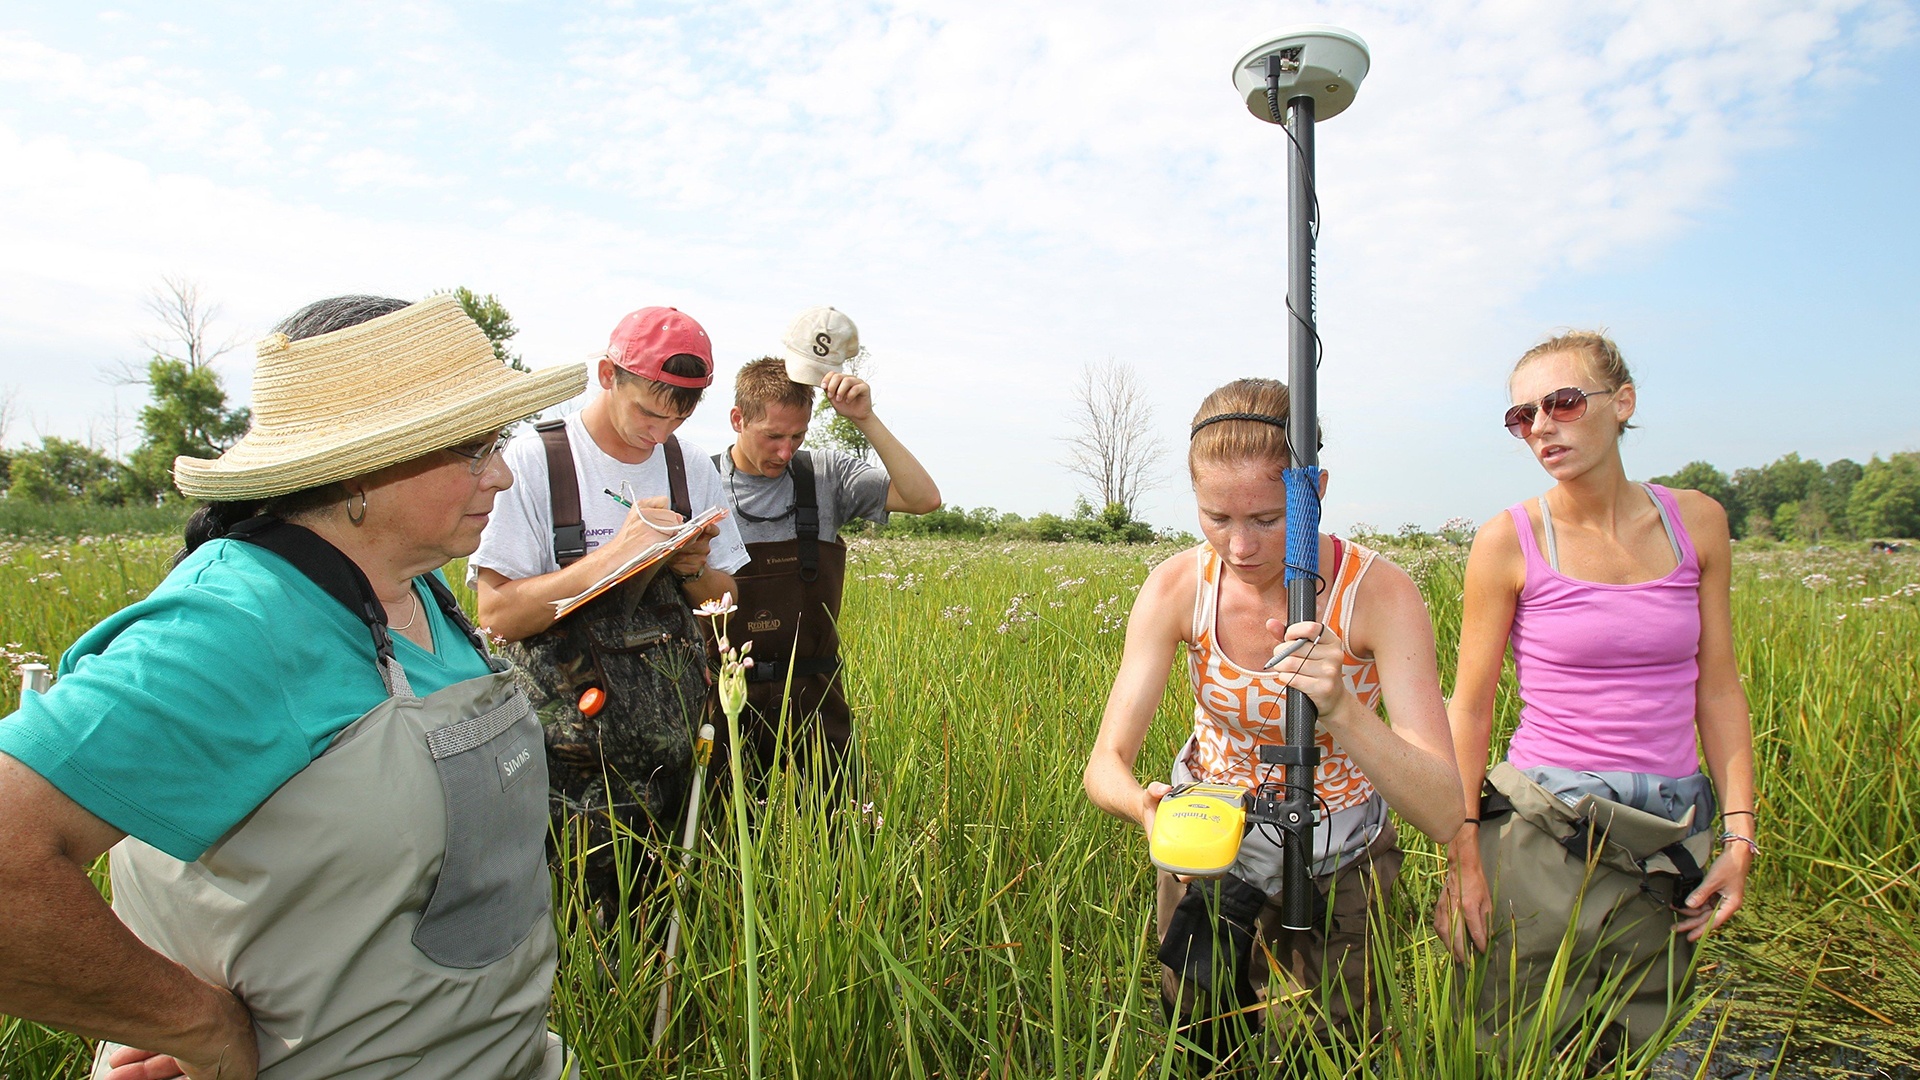 Ohio freshwater marshes are explored by BGSU biology major students with GPS locators and marine sample collection kits.